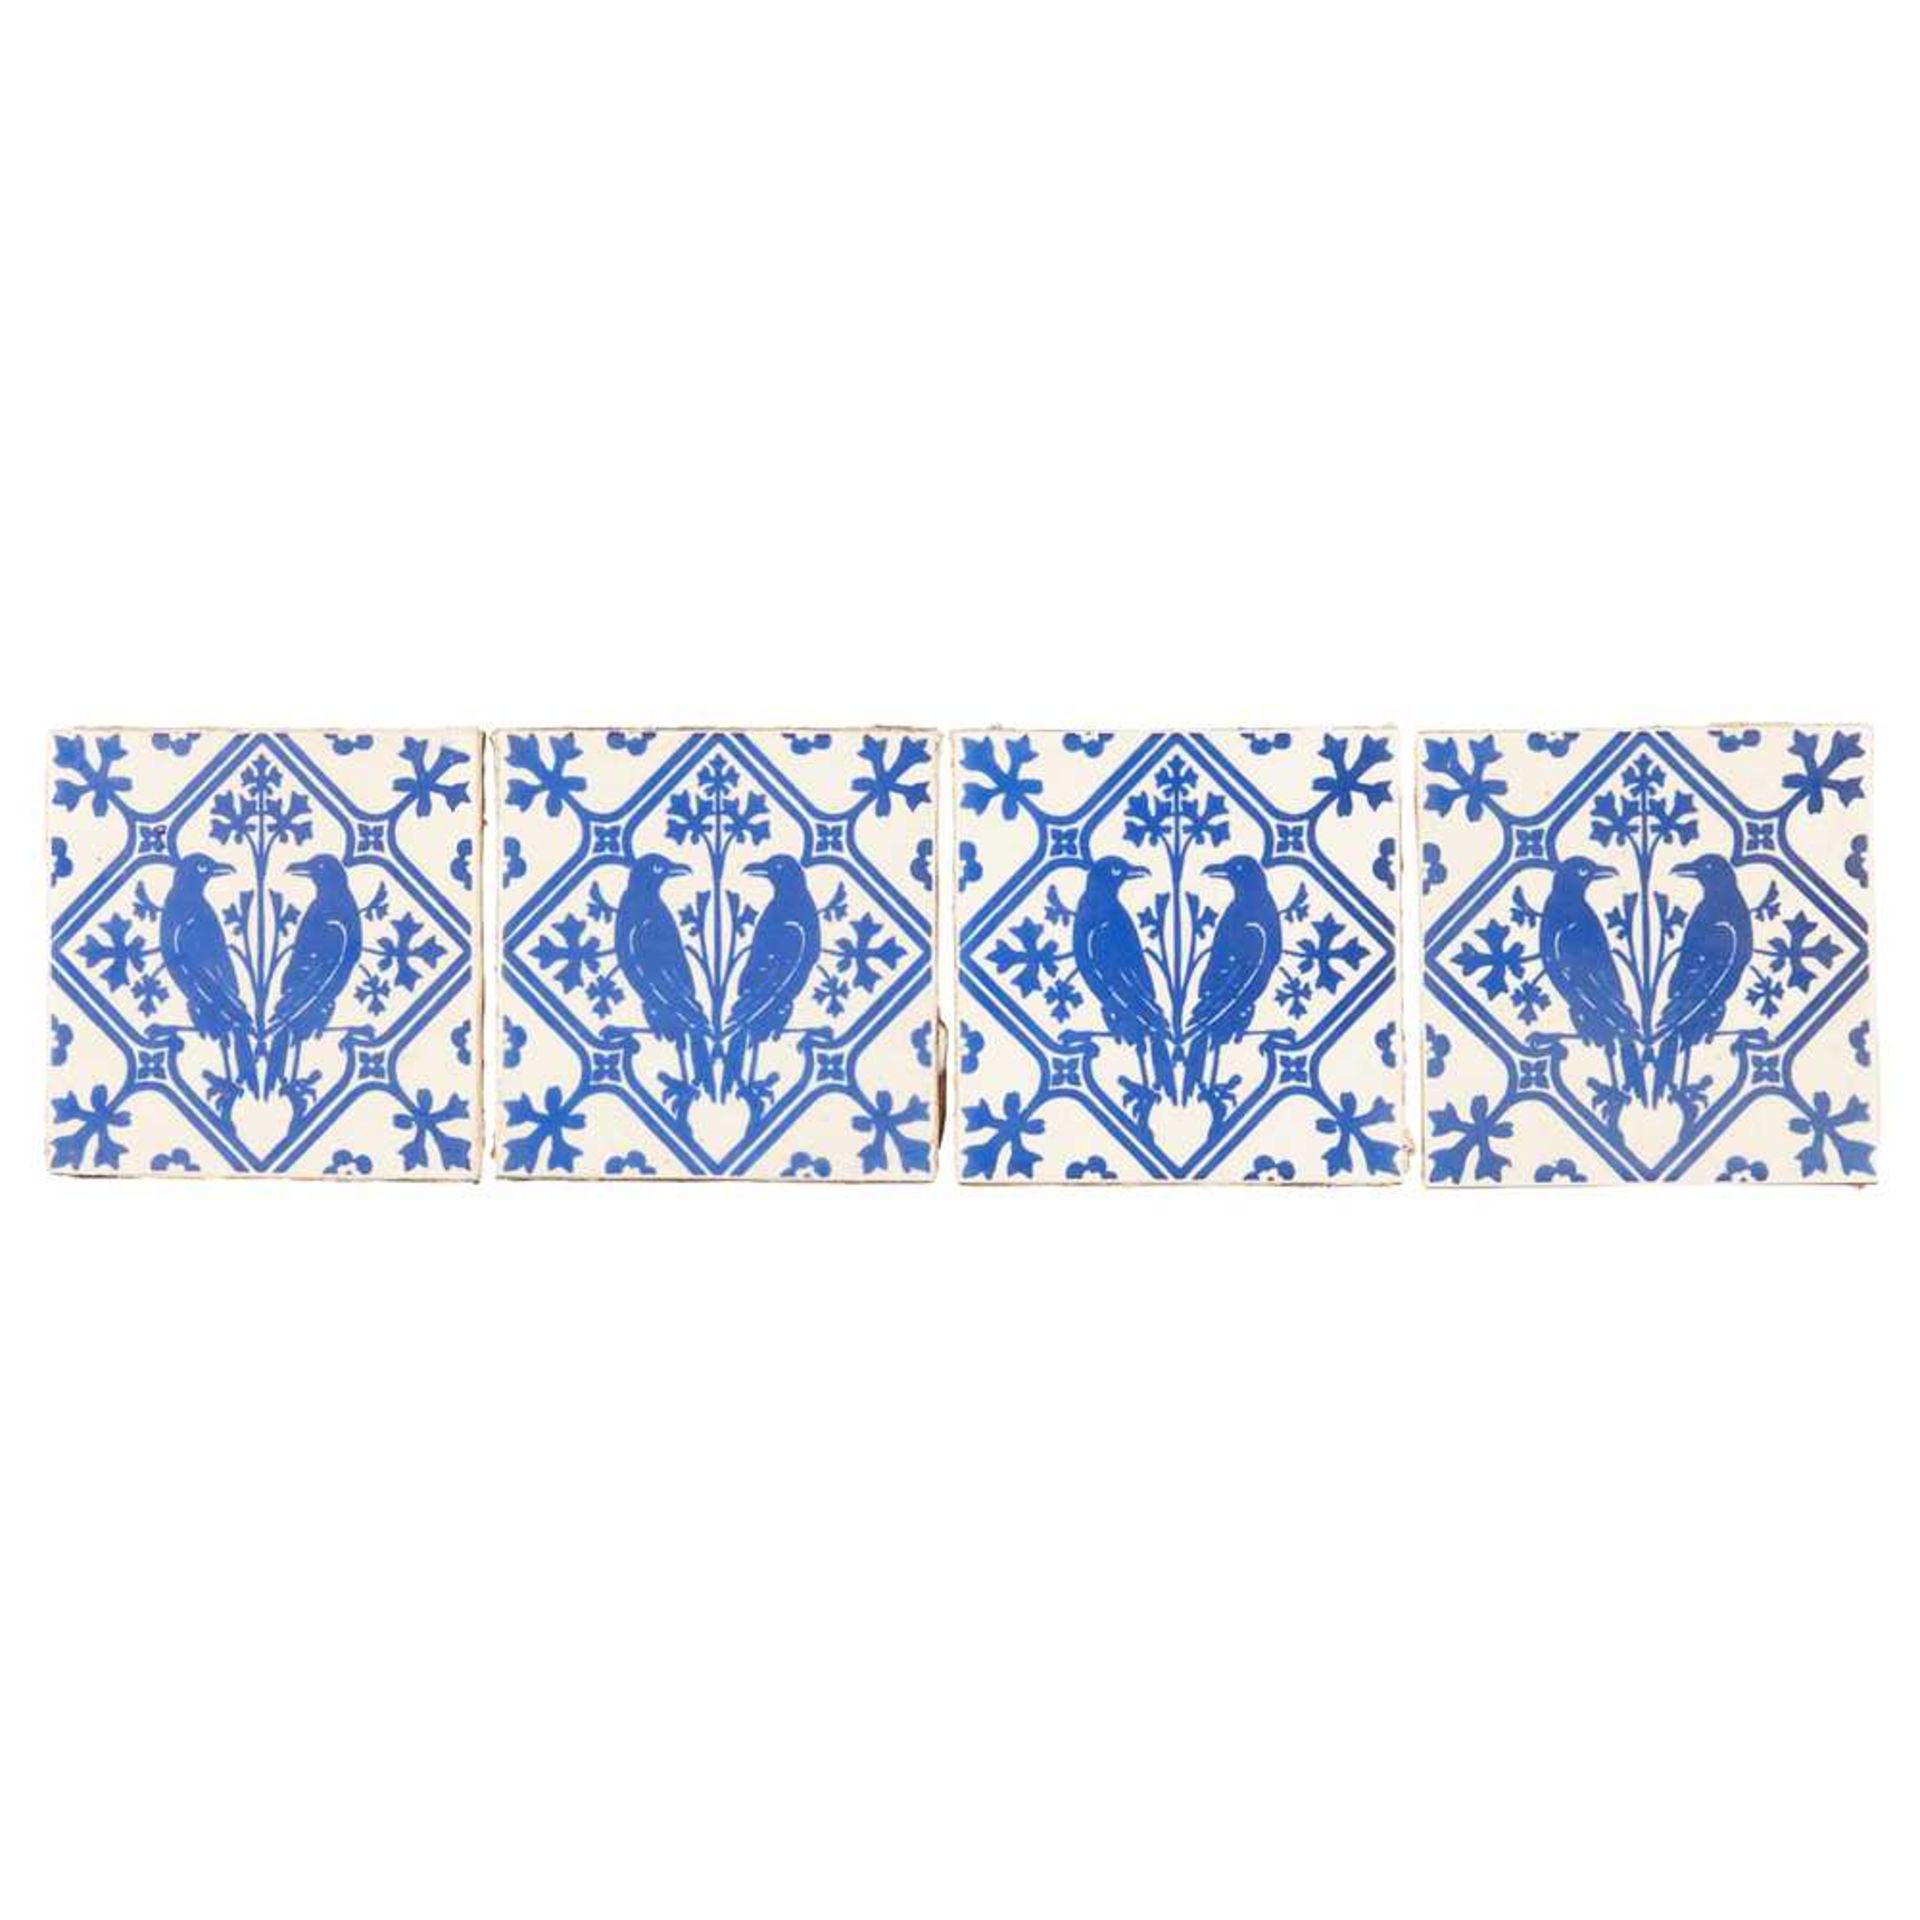 POSSIBLY A. W. N. PUGIN (1812- 1852) FOR MINTON & CO. SET OF FOUR GOTHIC REVIVAL TILES - Image 2 of 4